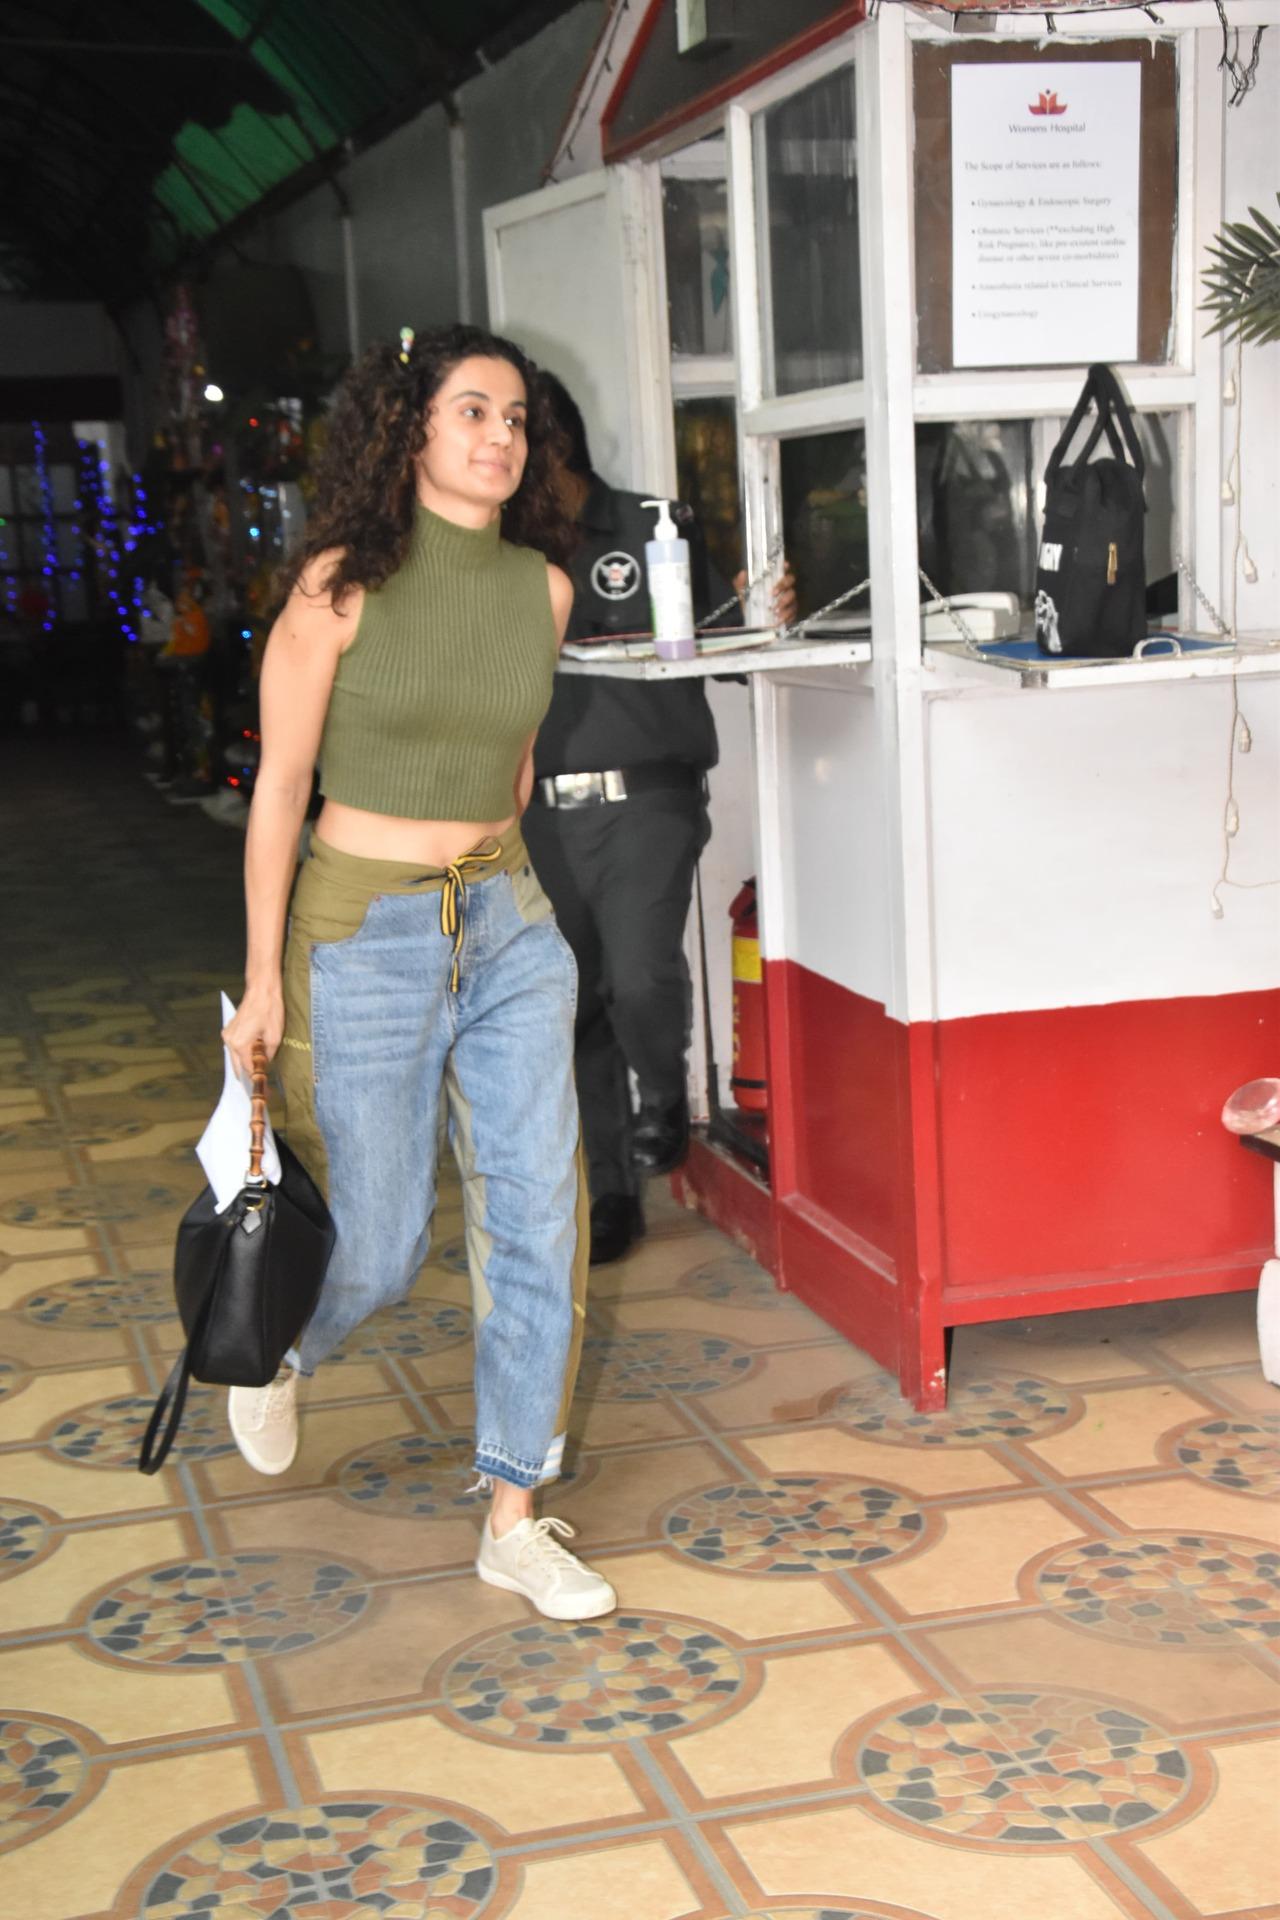 Taapsee Pannu made an appearance in the city